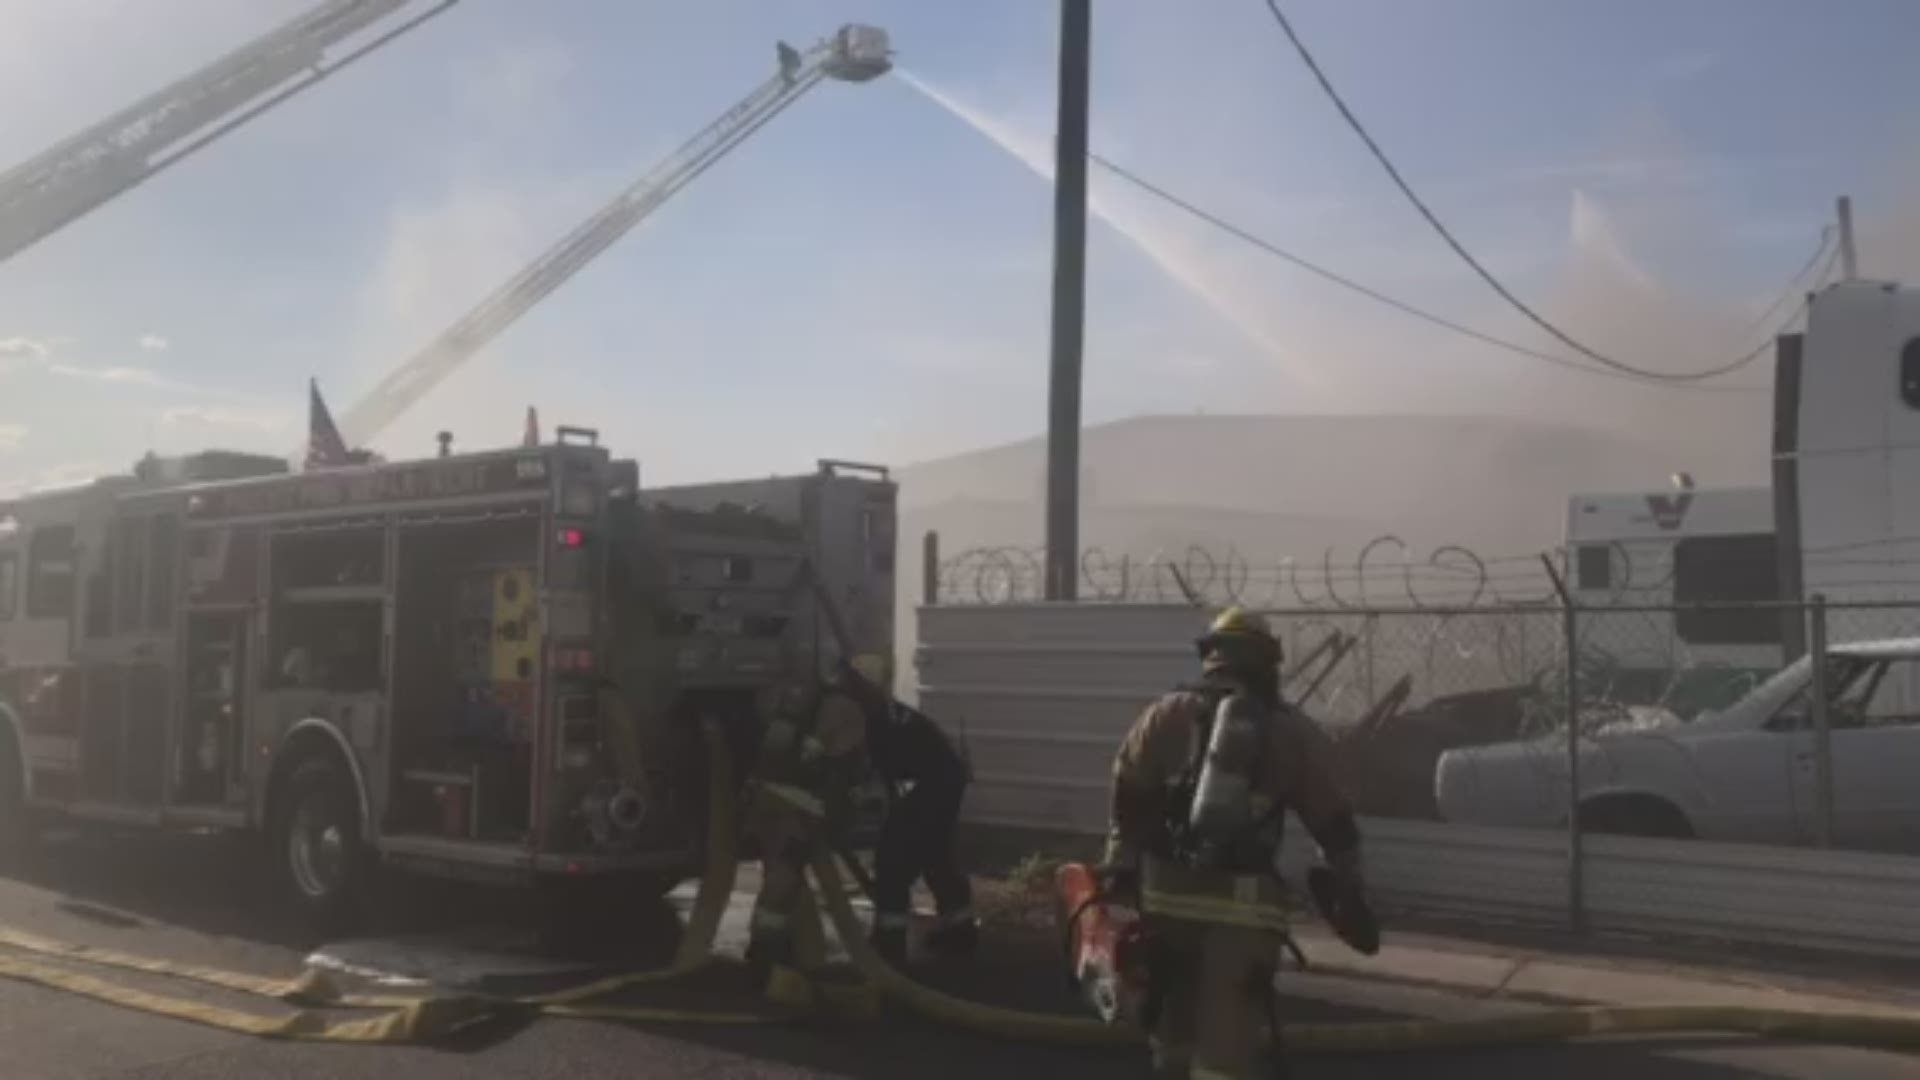 Crews are battling a second-alarm fire at a large building near 33rd Avenue and Sherman in south Phoenix. No injuries have been reported, but Phoenix Fire is asking people to avoid the area.